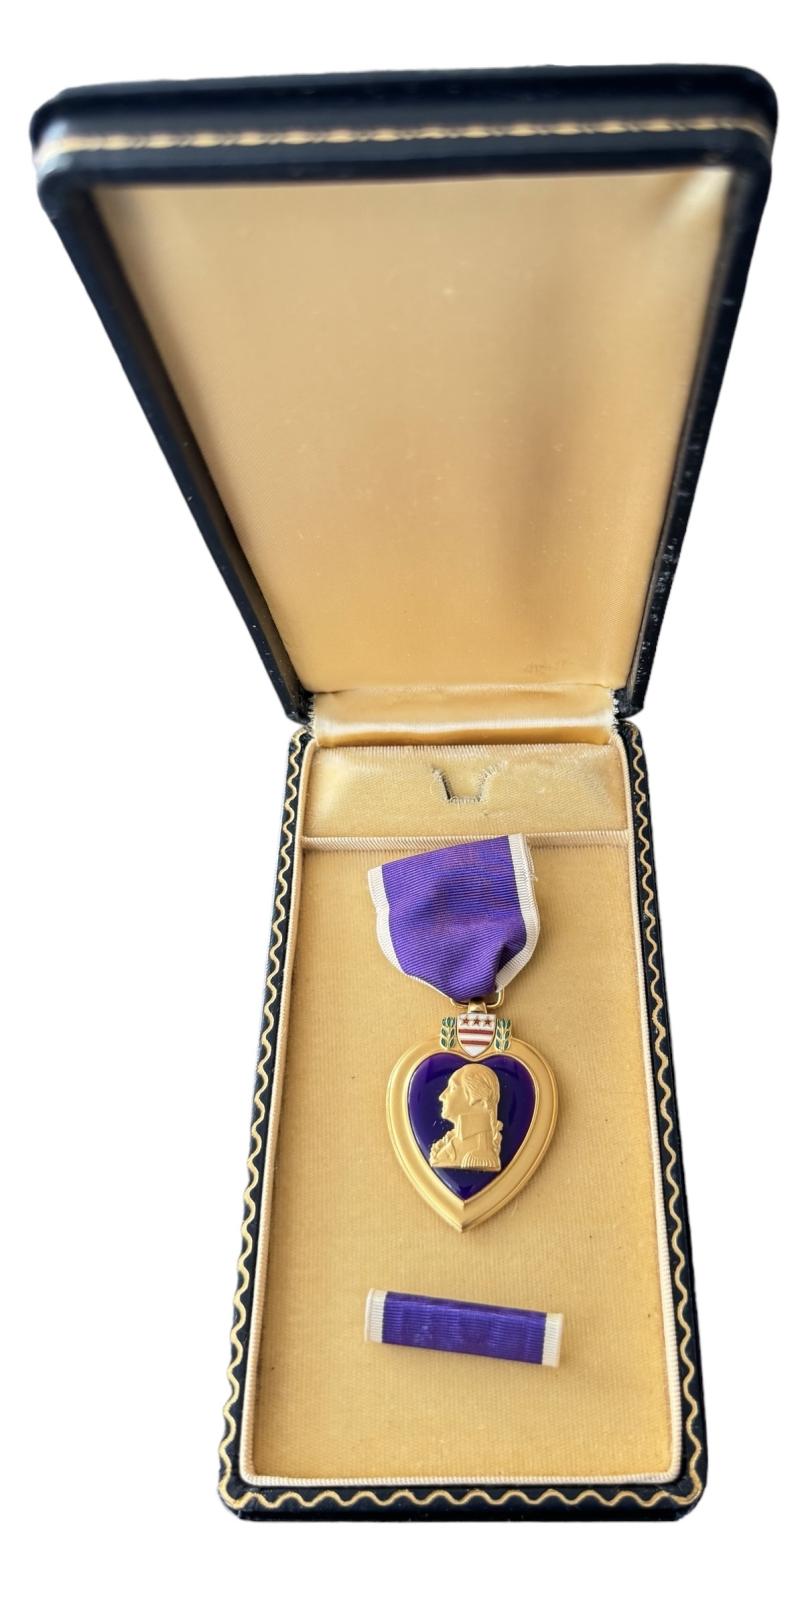 U.S. Purple Heart Medal in Box Named - Nice Used Condition